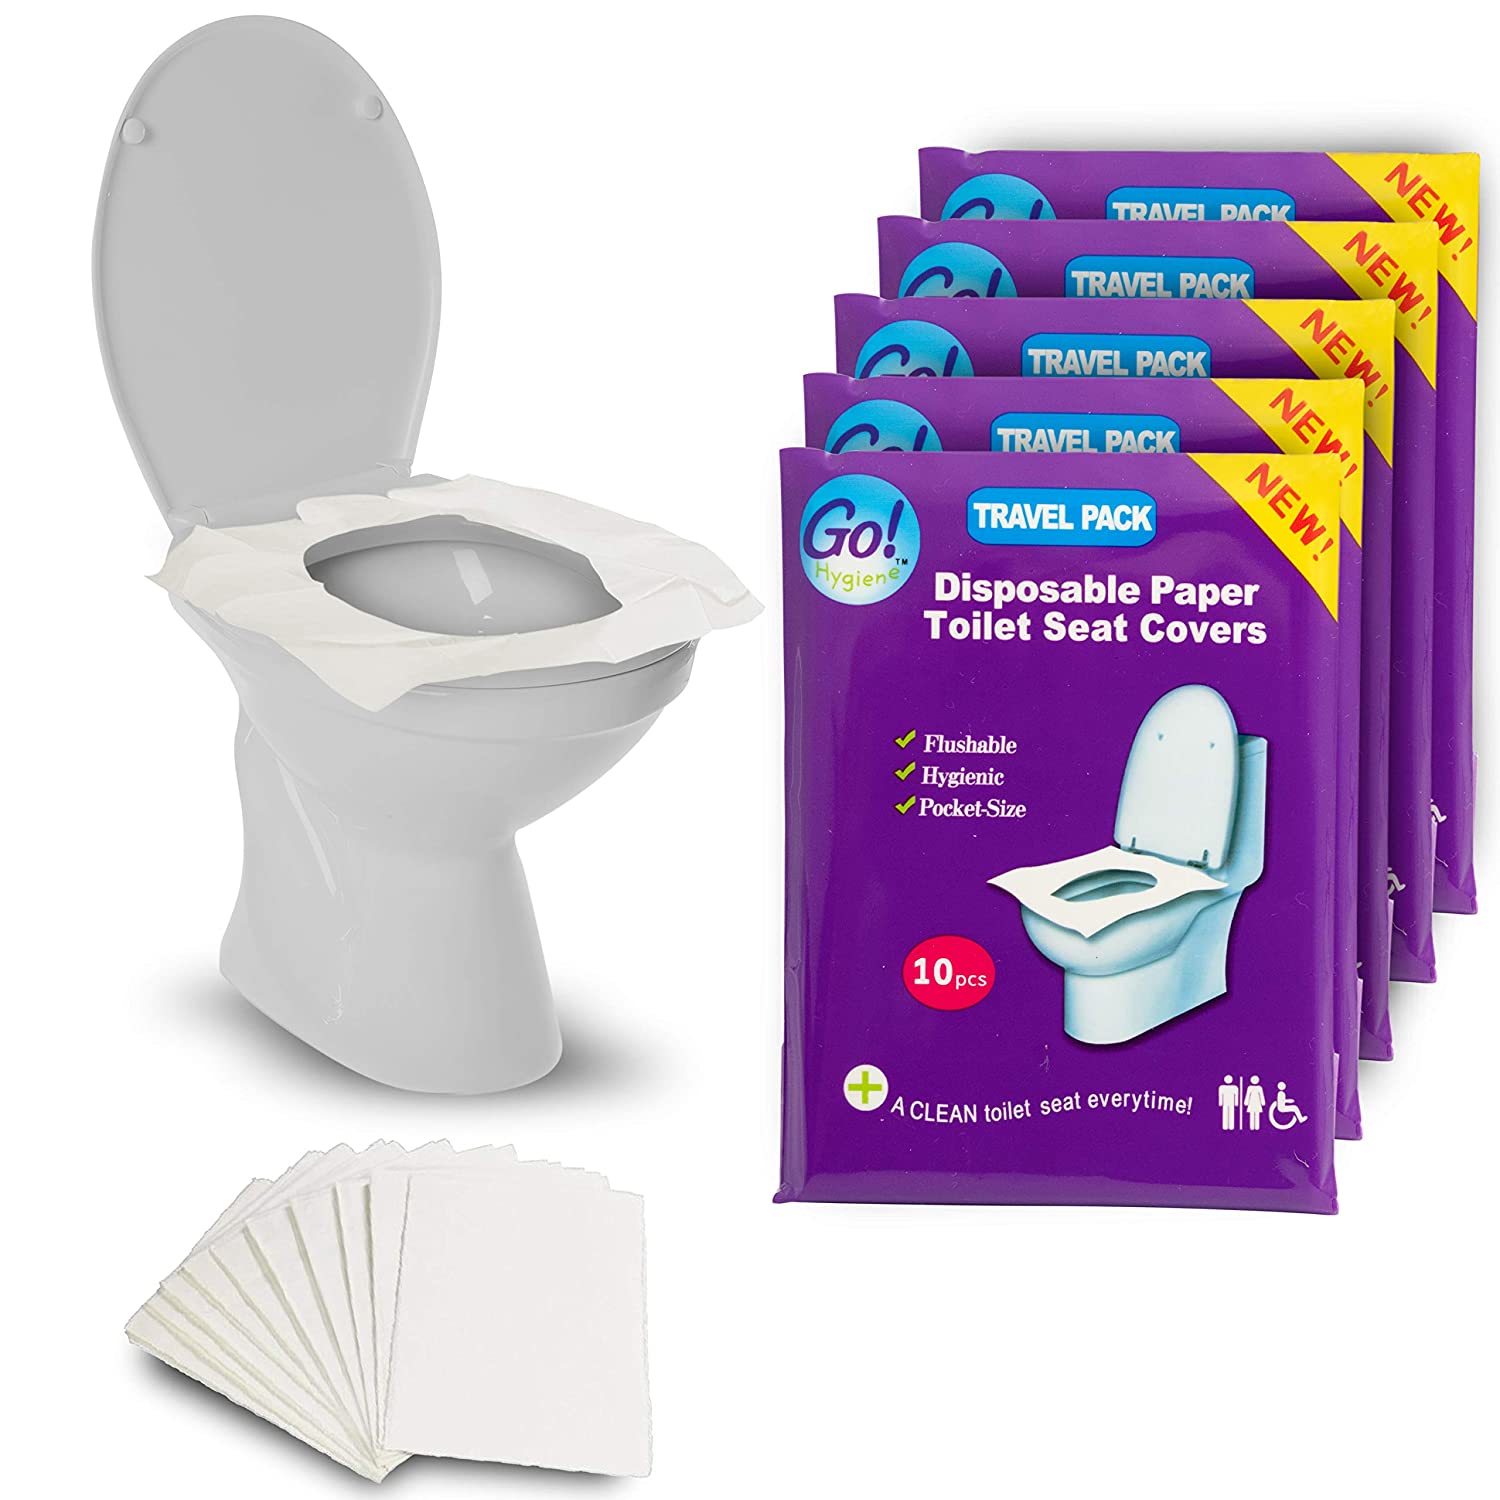 Toilet Seat Cover Disposable Clean Hygienic Protection Flushable Travel Sanitary 